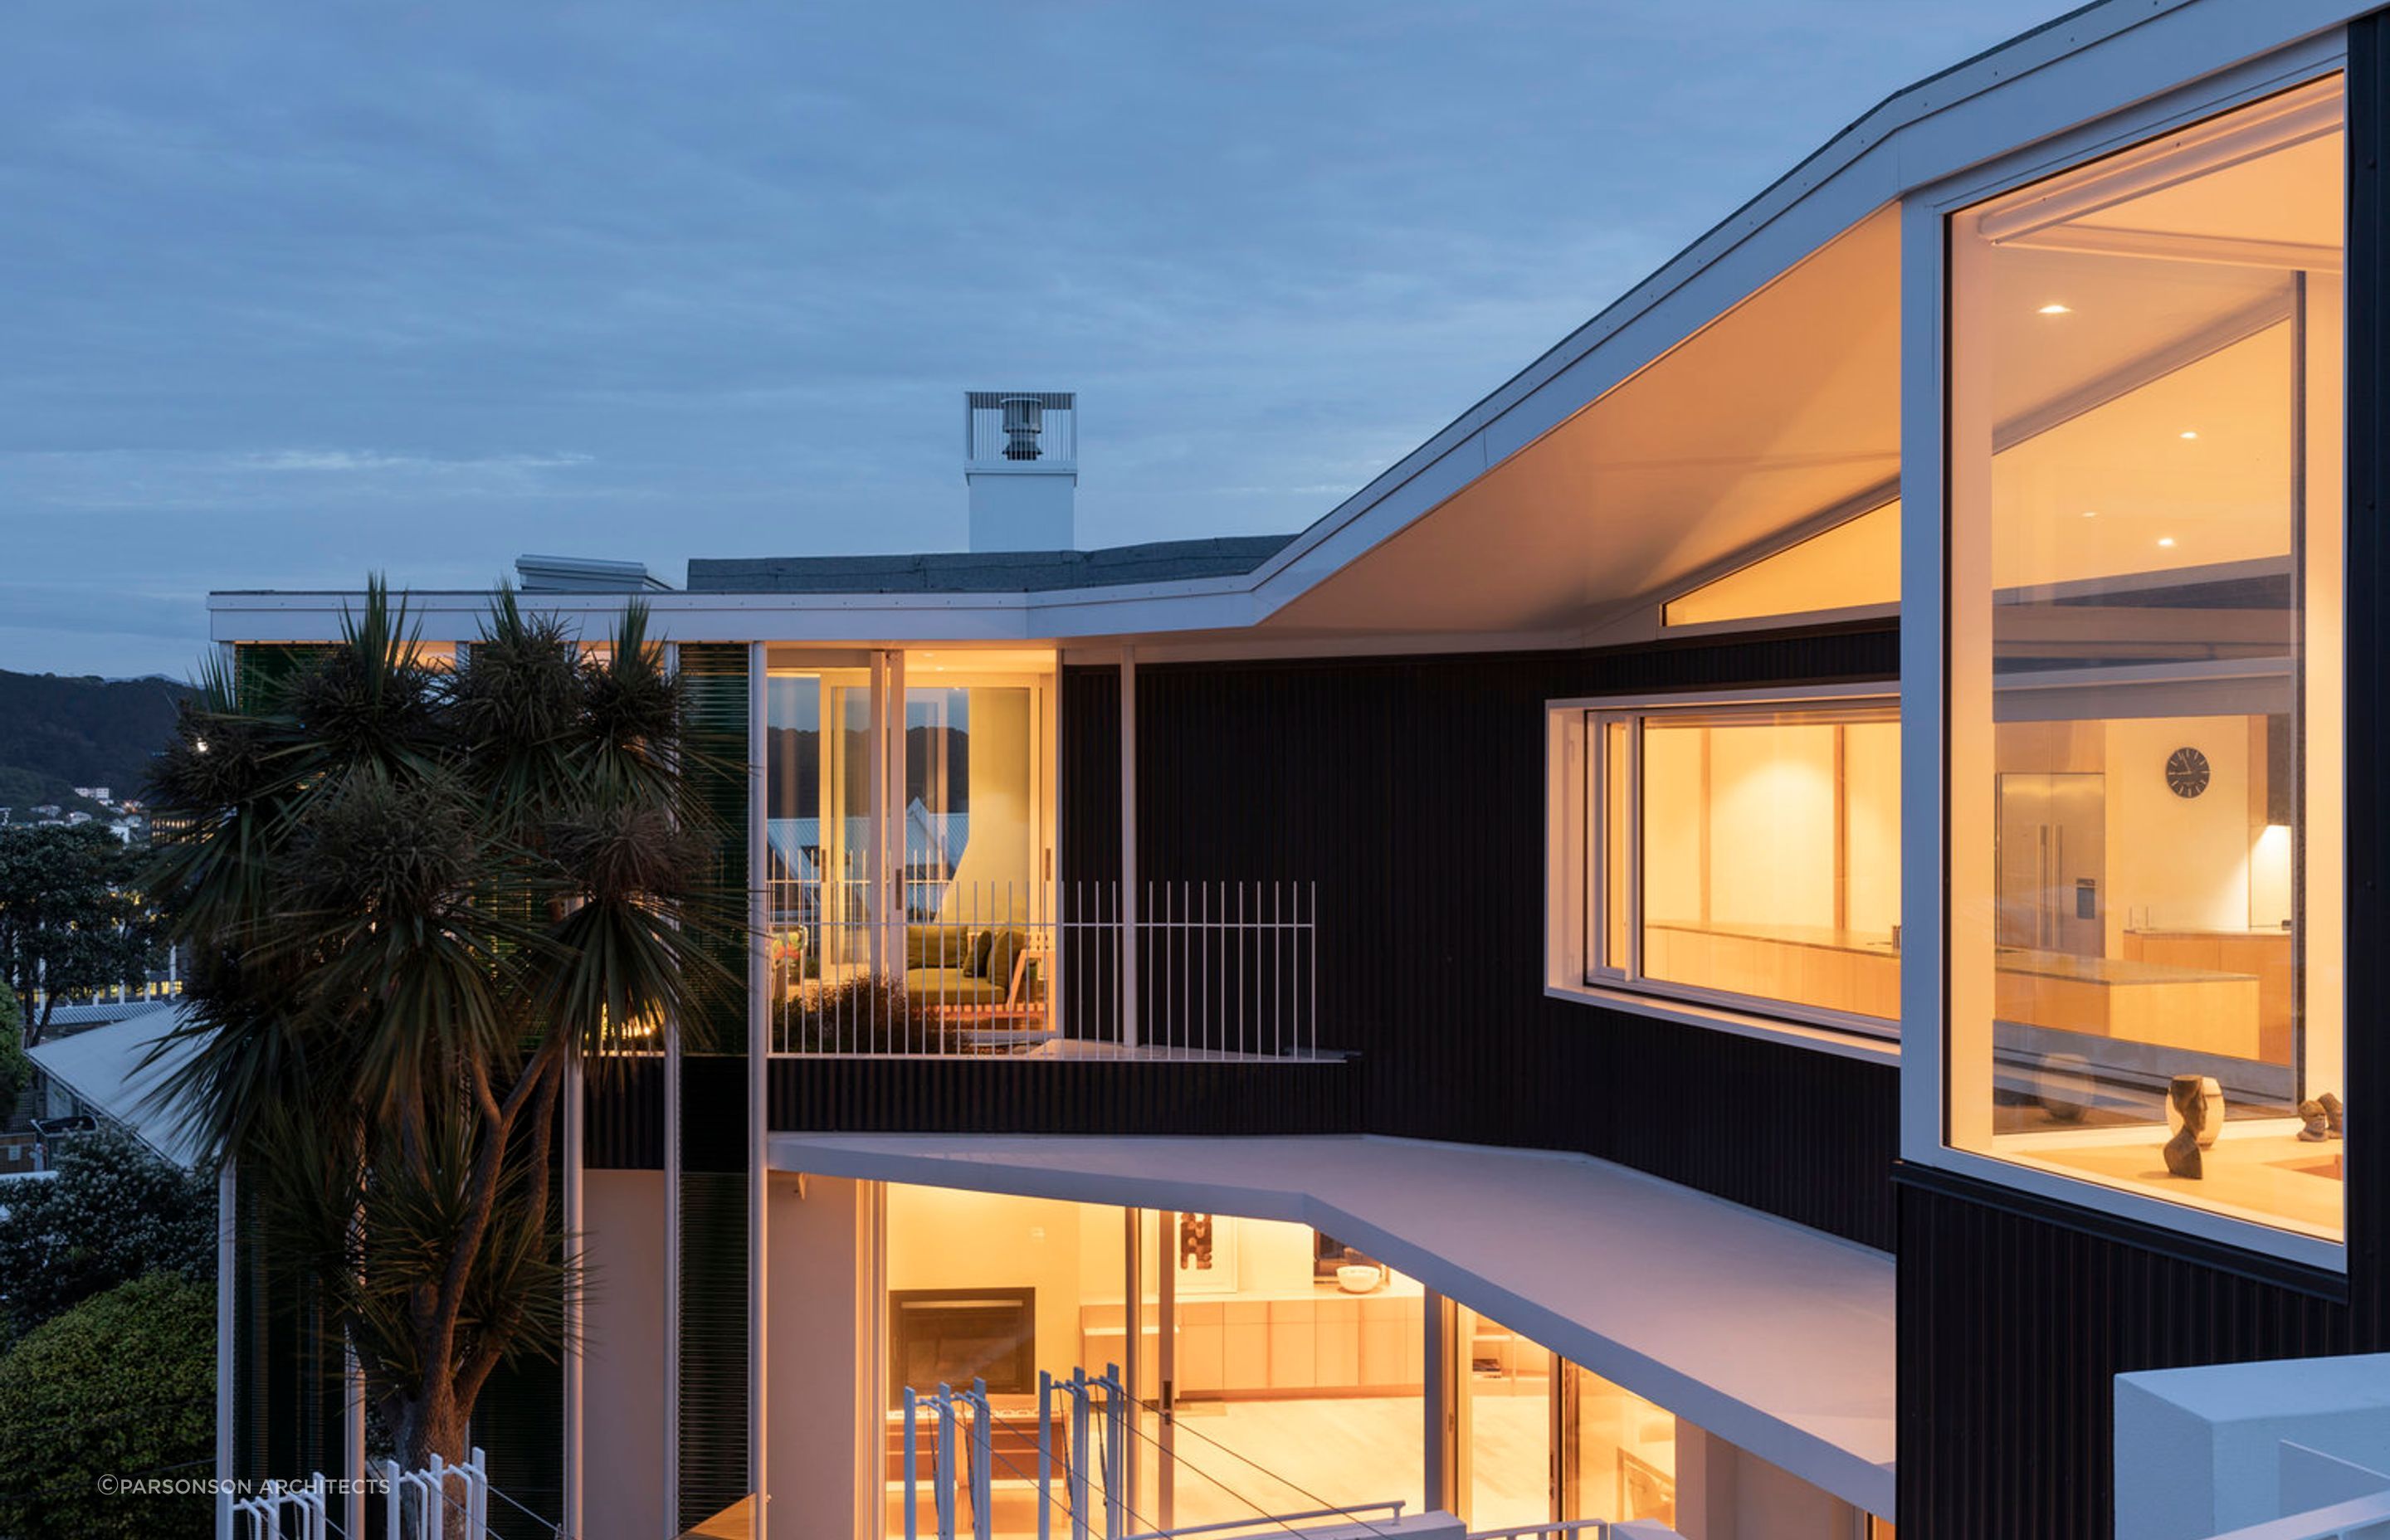 A mechanical heat exchange system helps keep the duplex warm, even after the sun goes down. Photography: David Straight